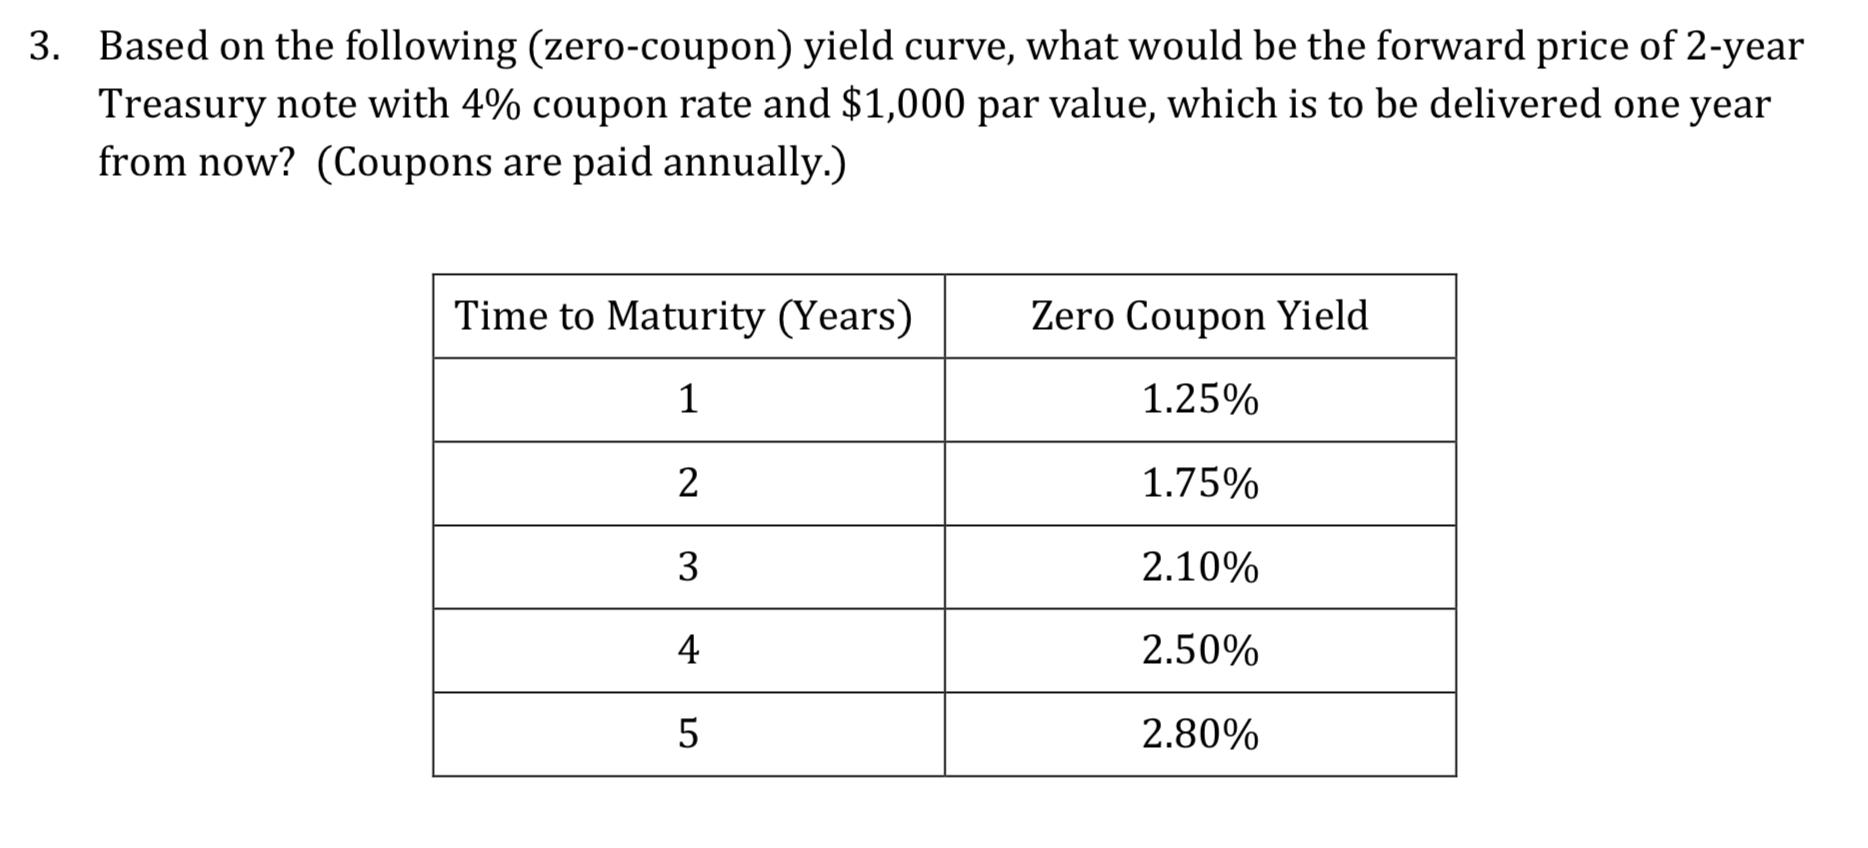 3. Based on the following (zero-coupon) yield curve, what would be the forward price of 2-year Treasury note with 4% coupon r